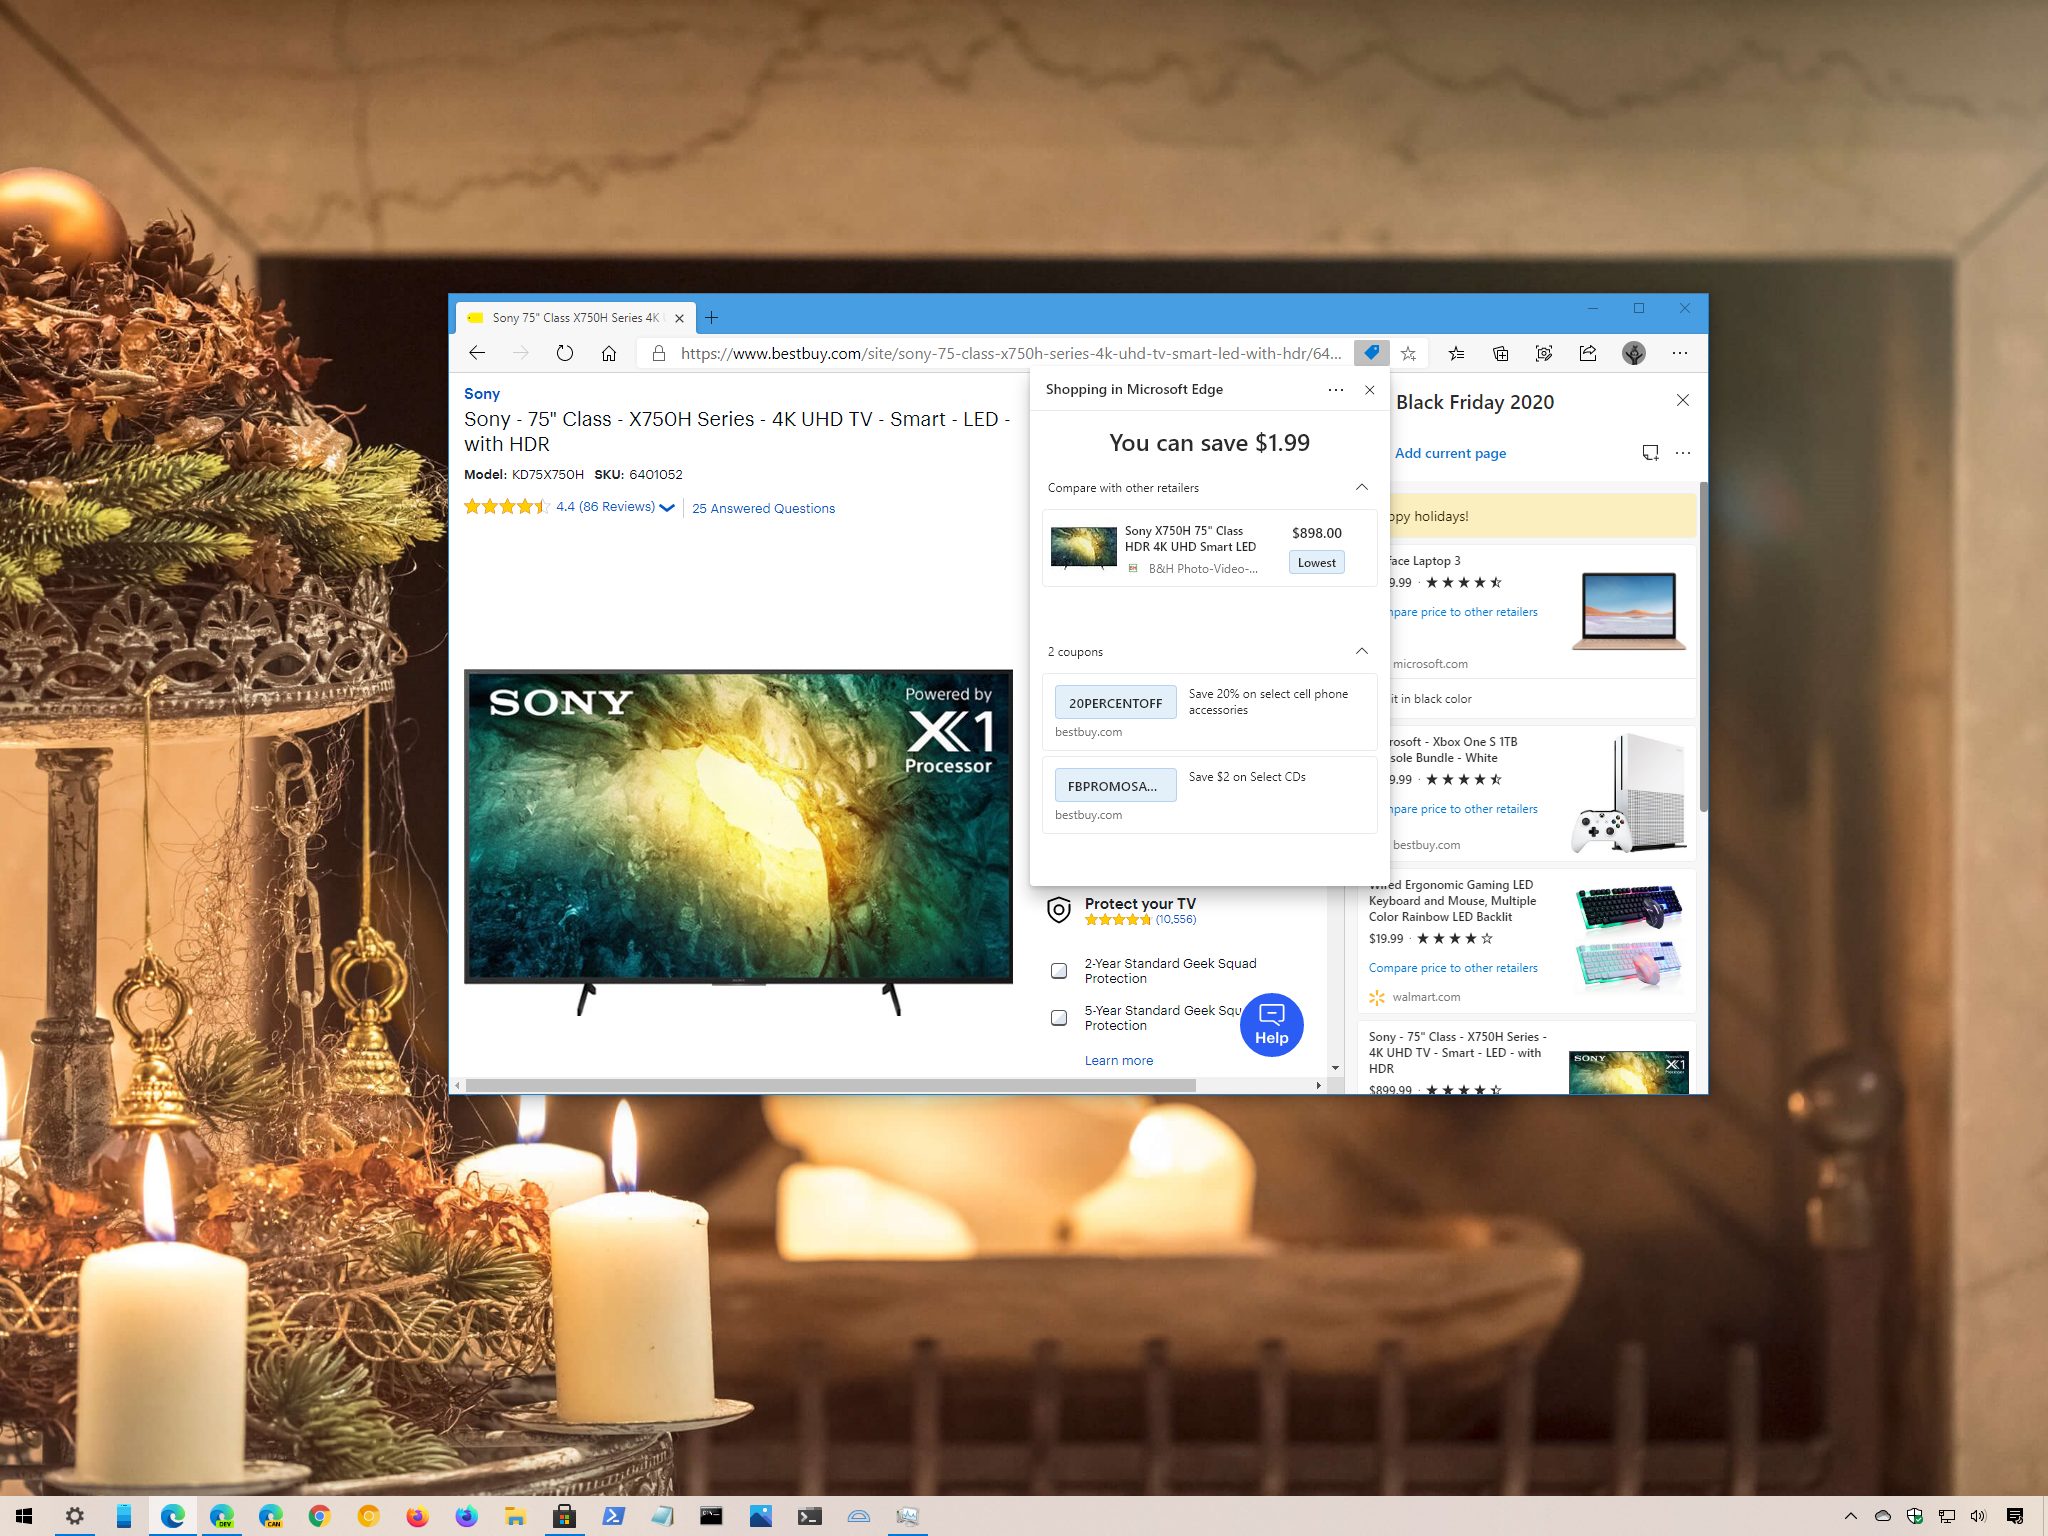 How to use Microsoft Edge to save time and money on Black Friday 2020